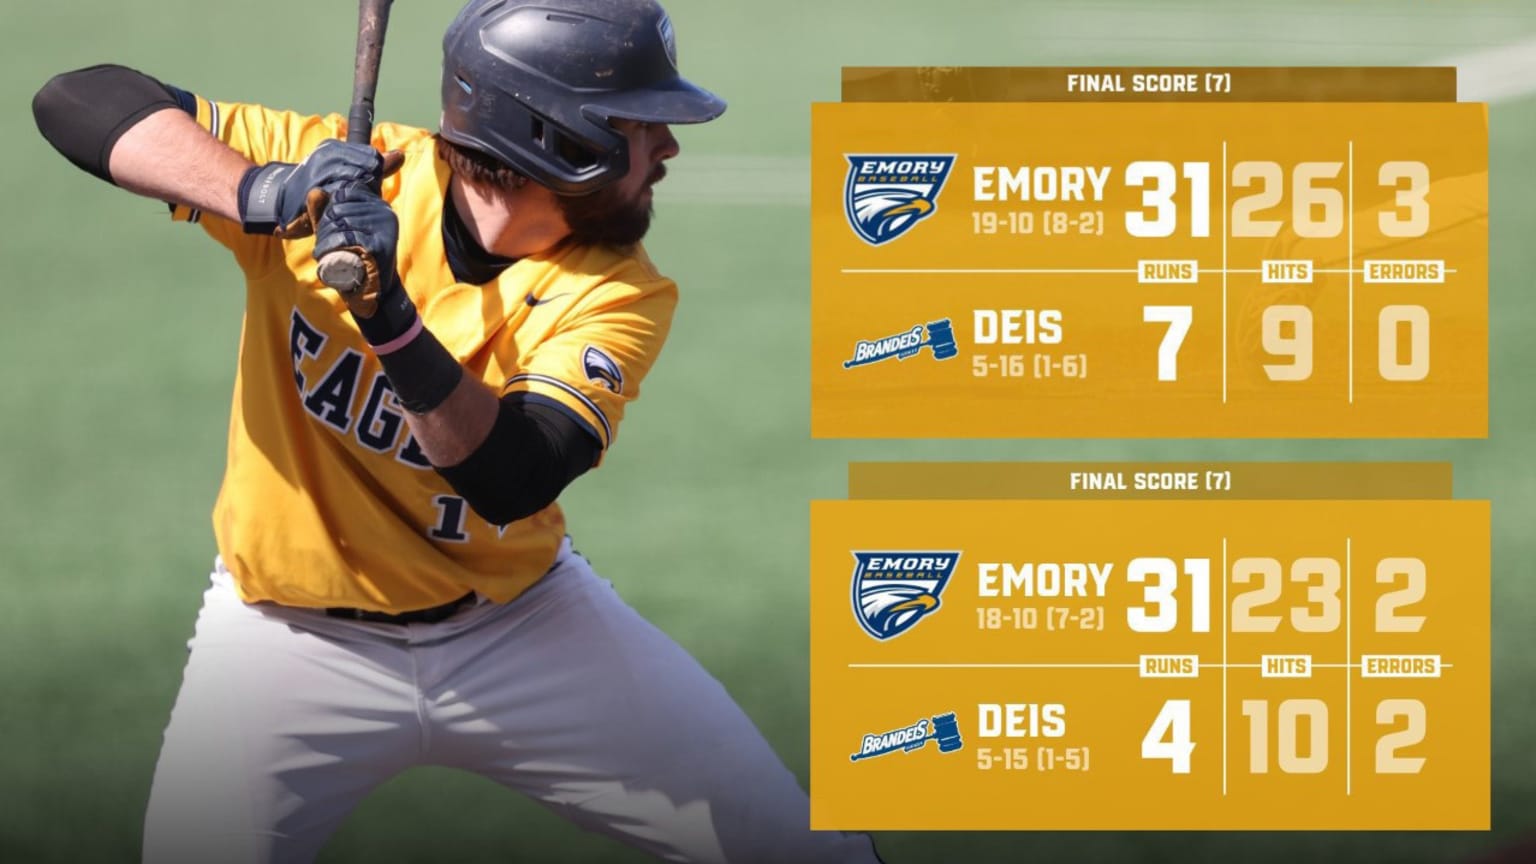 A picture of an Emory baseball player with statistics from doubleheader showing 31 runs in each game